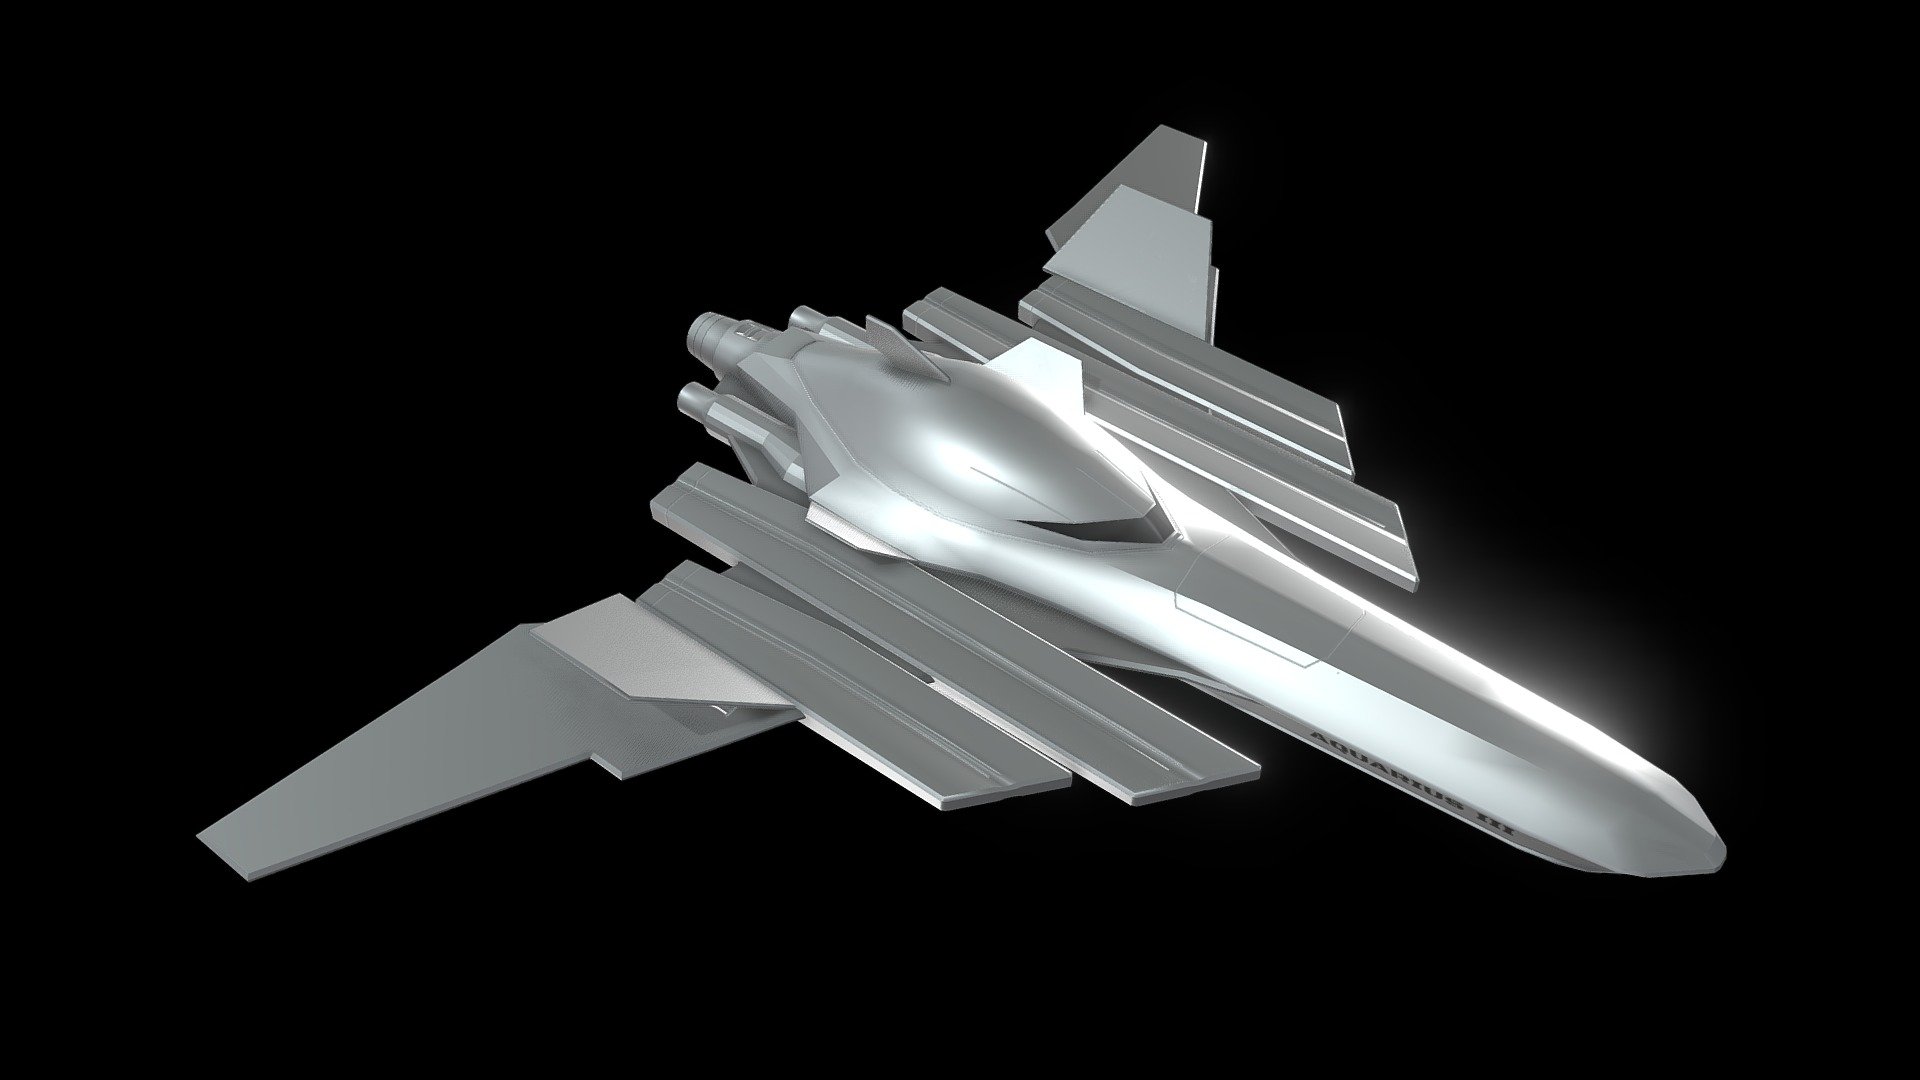 3D Model I made in celebration of Logic's  upcoming album ULTRA 85. The exit hatch is on the top. This ship has anti-gravity drives meaning it can float over whatever terrain making it perfect for planetory exploration. It runs on an Ultralight battery an almost infinite power source. (Think densly packed compressed light) 3d model